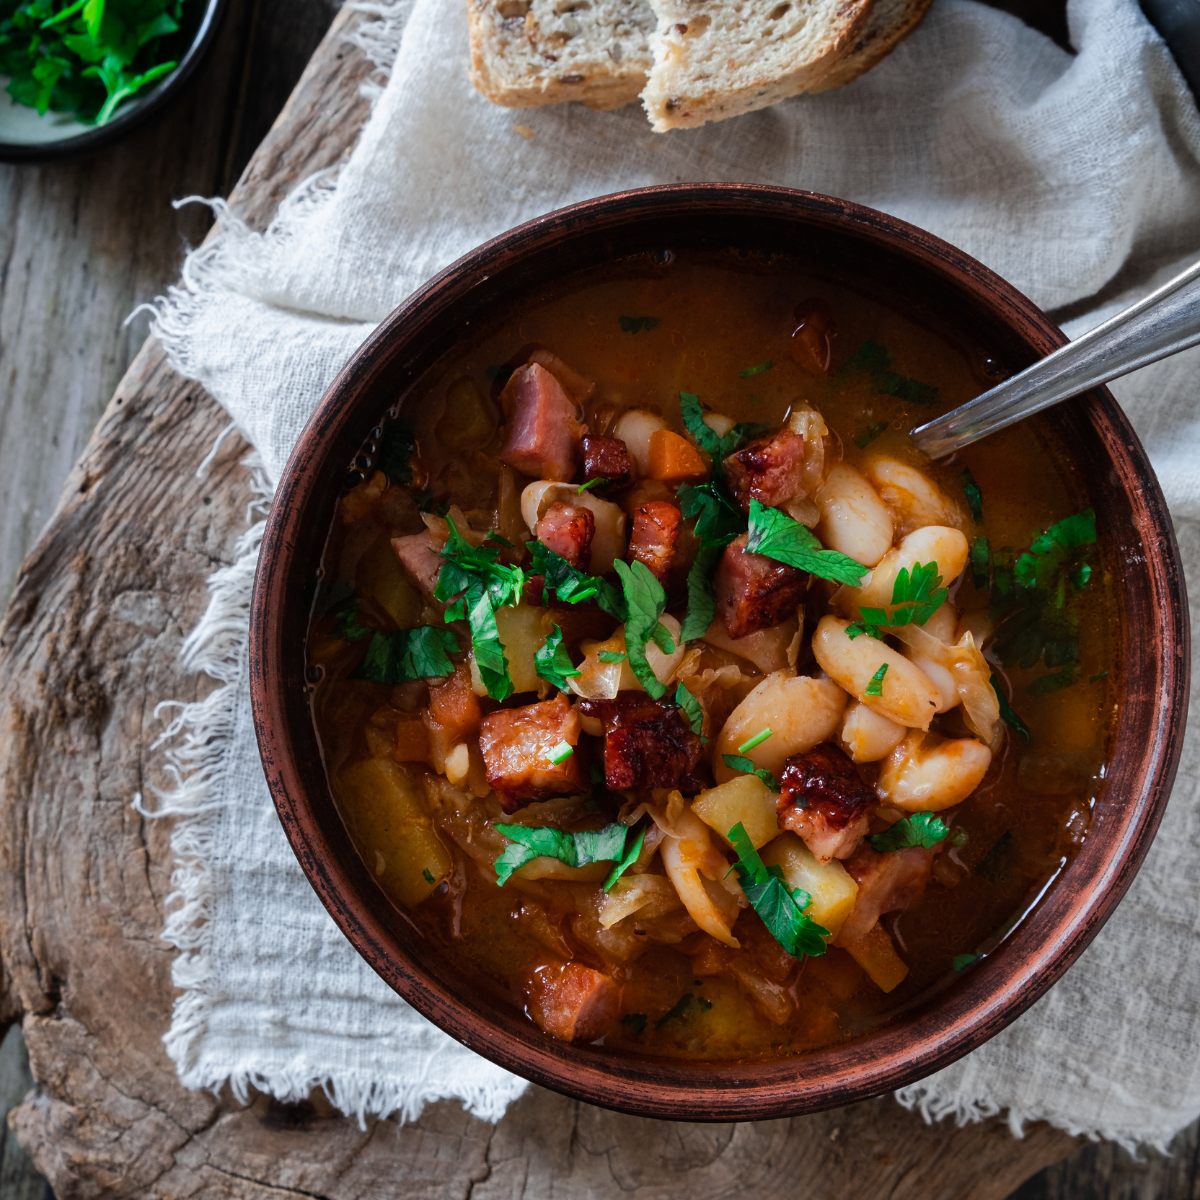 A bowl of Istrian jota soup or stew full of ham, beans, sauerkraut, bacon, and other vegetables.